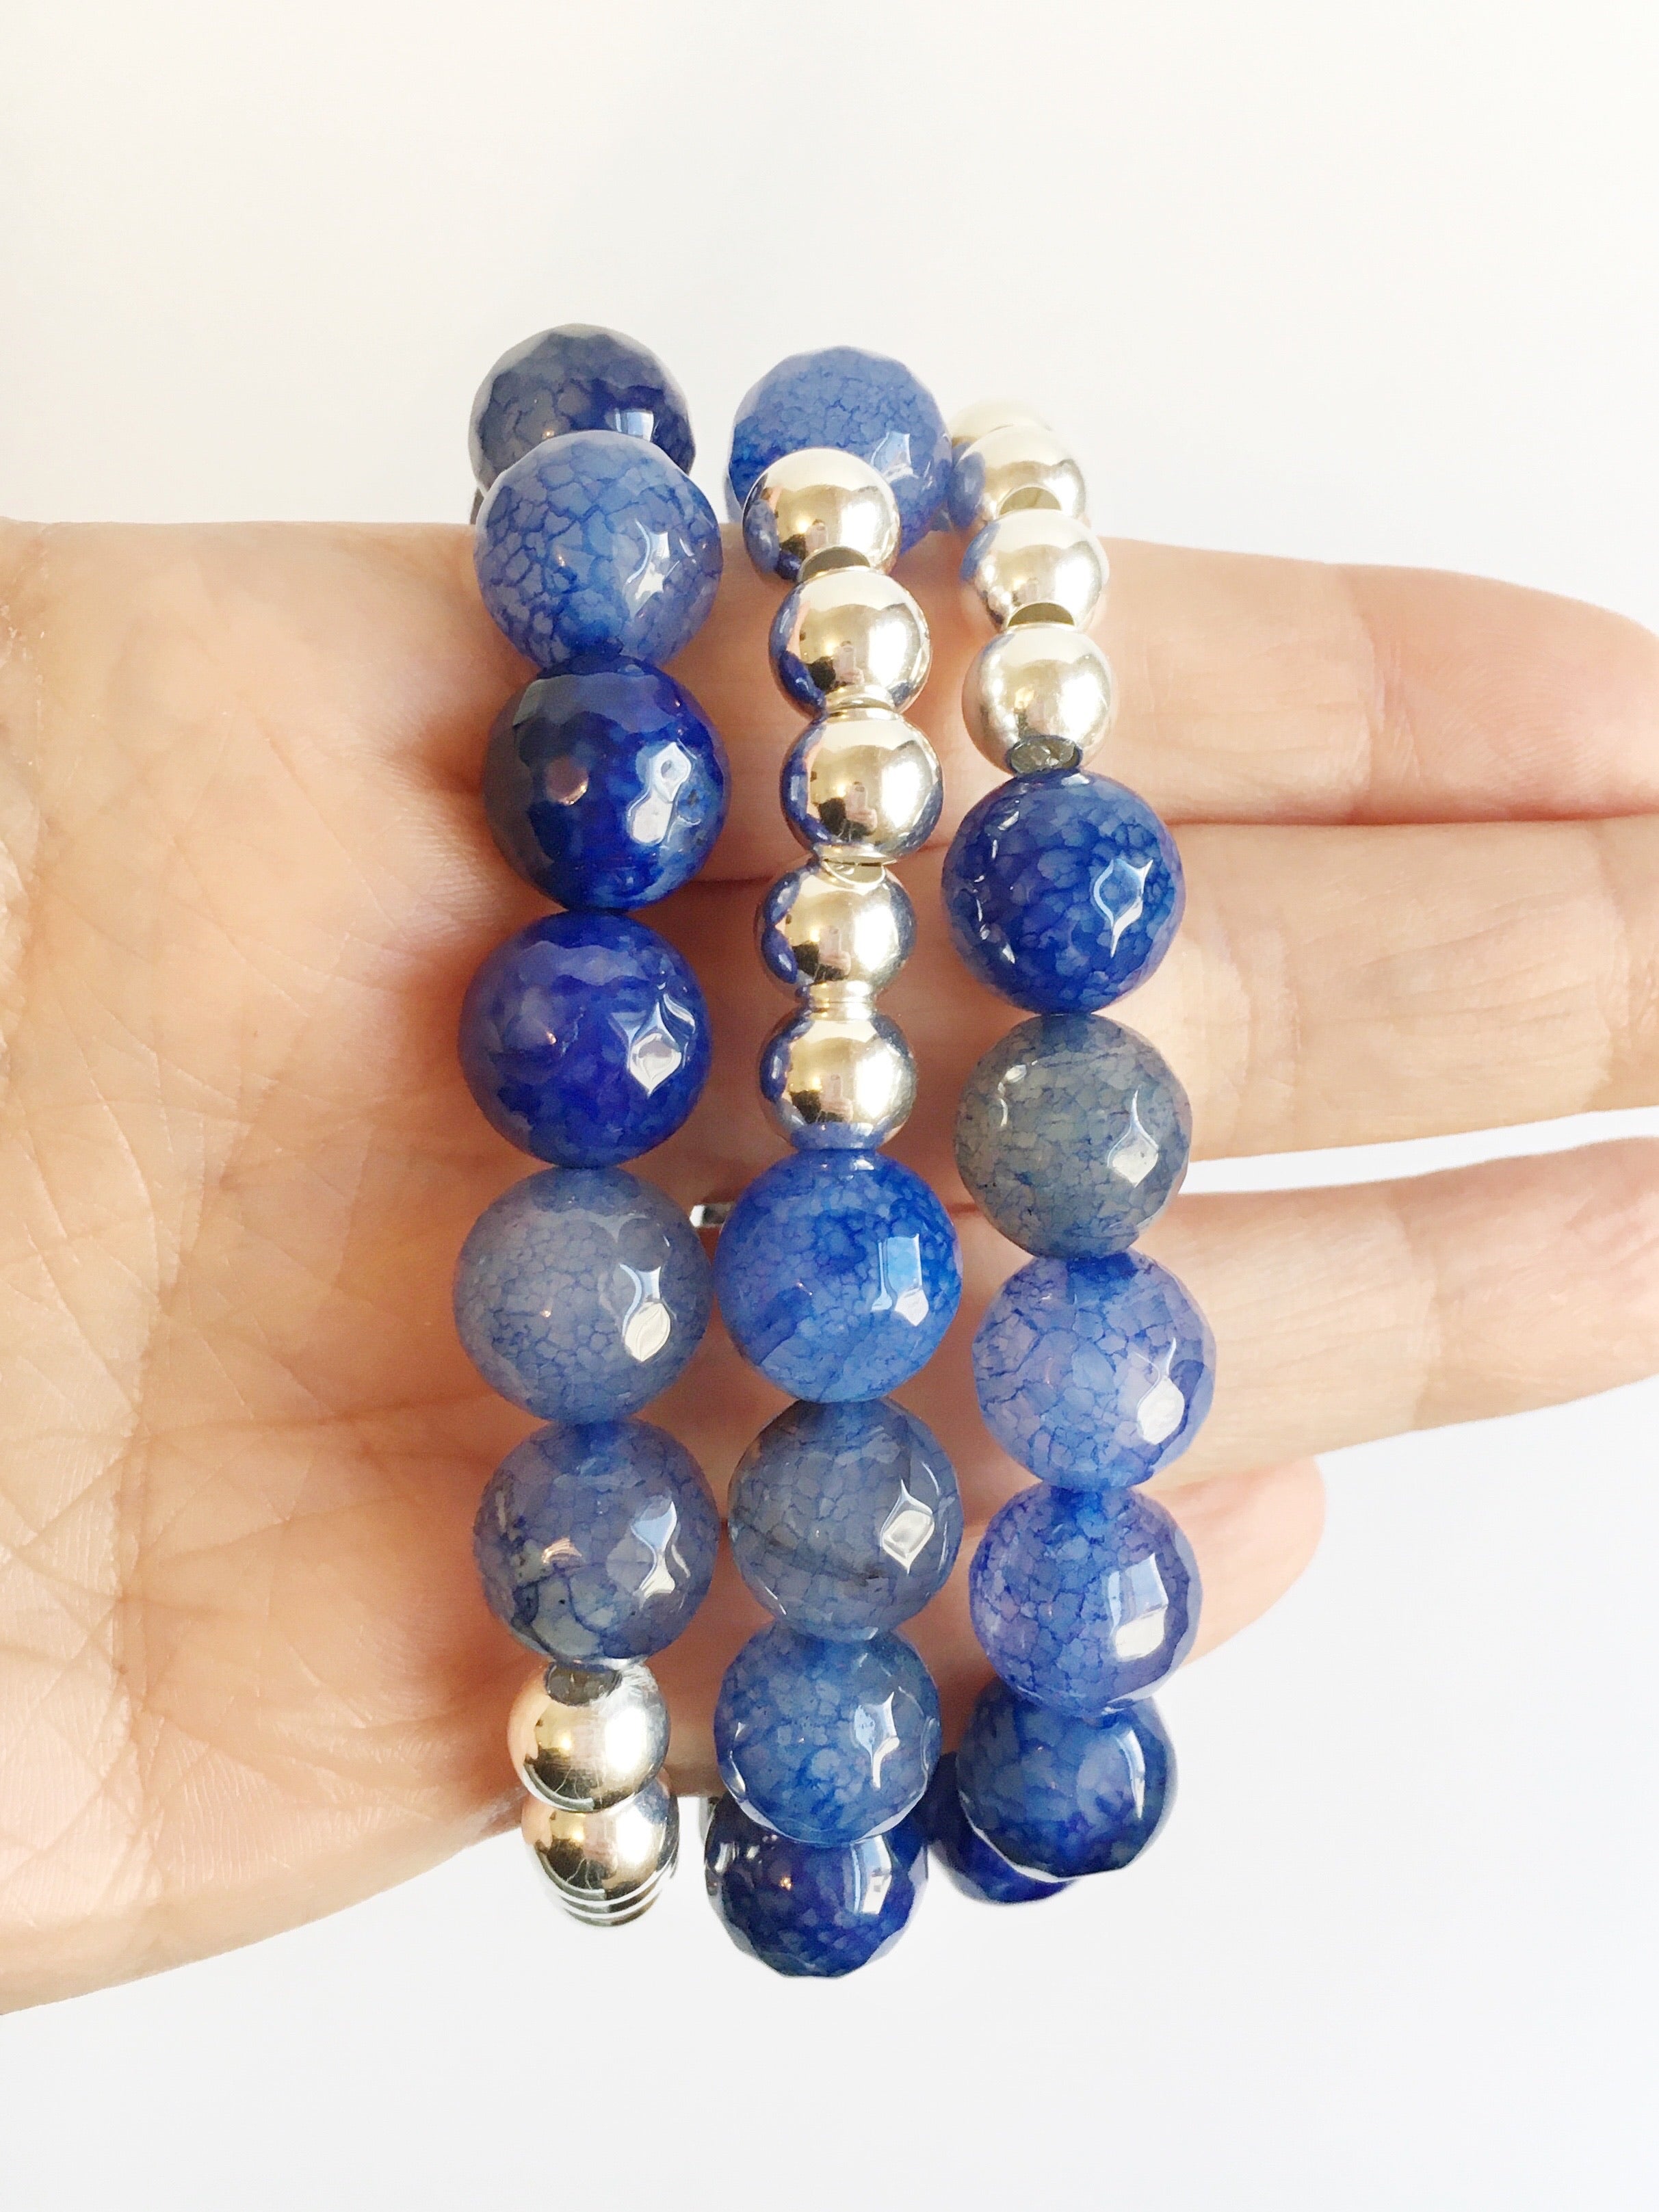 Hand holding Blue Striped Agate and Silver Beaded Stretch Bracelets on fingers.